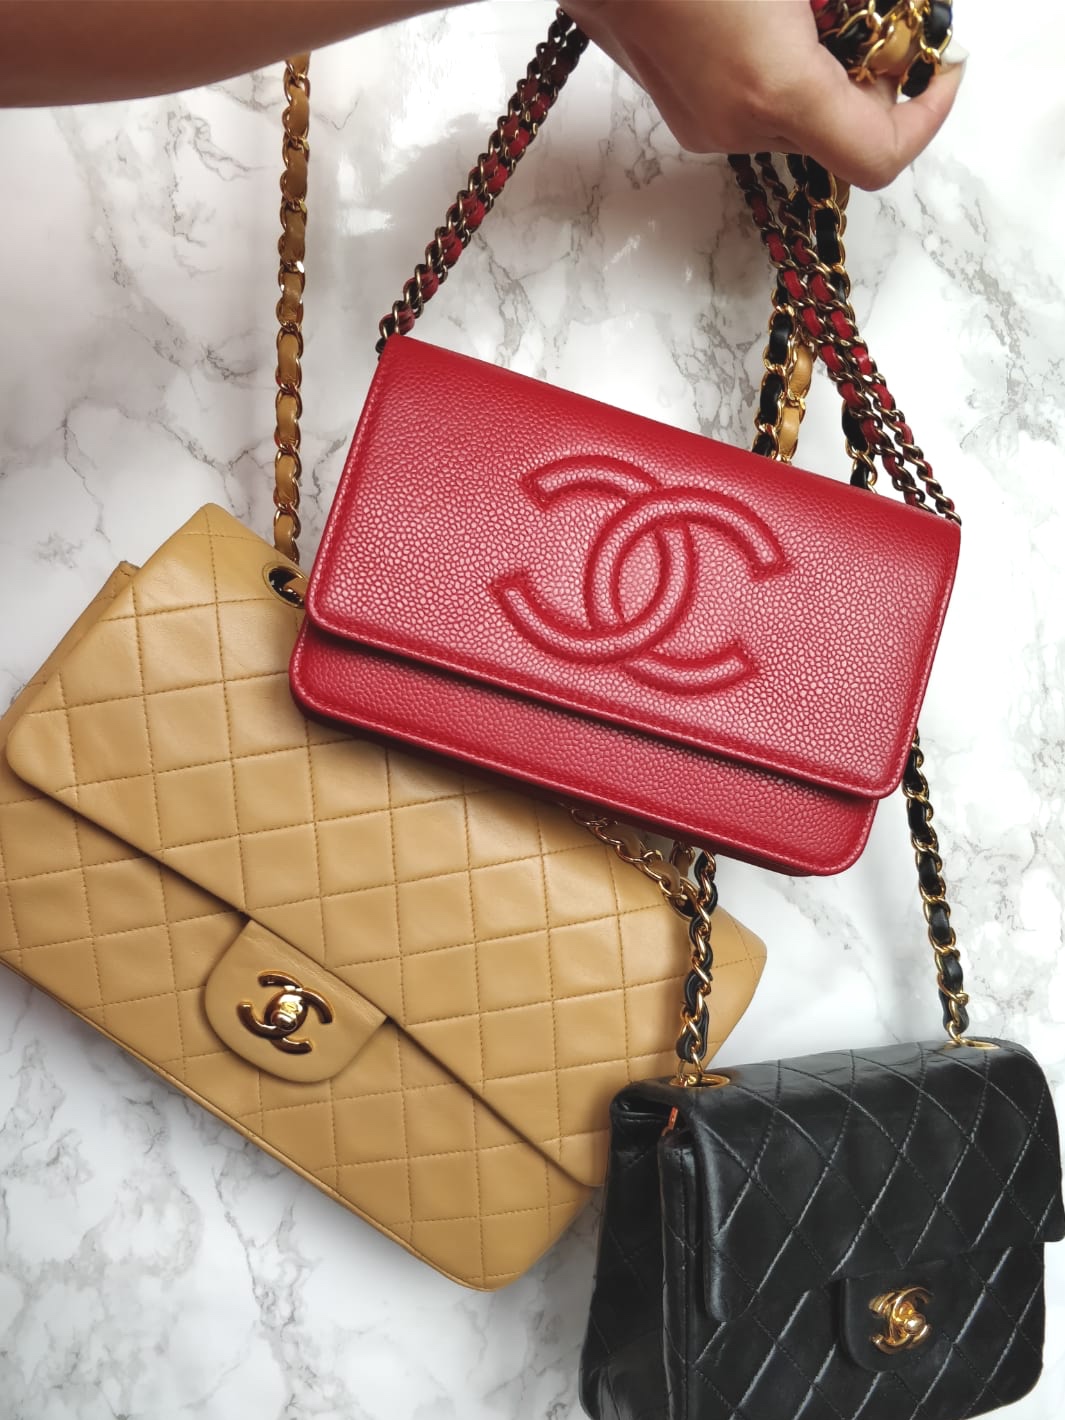 7 Great EVERYDAY CHANEL BAGS To Consider 